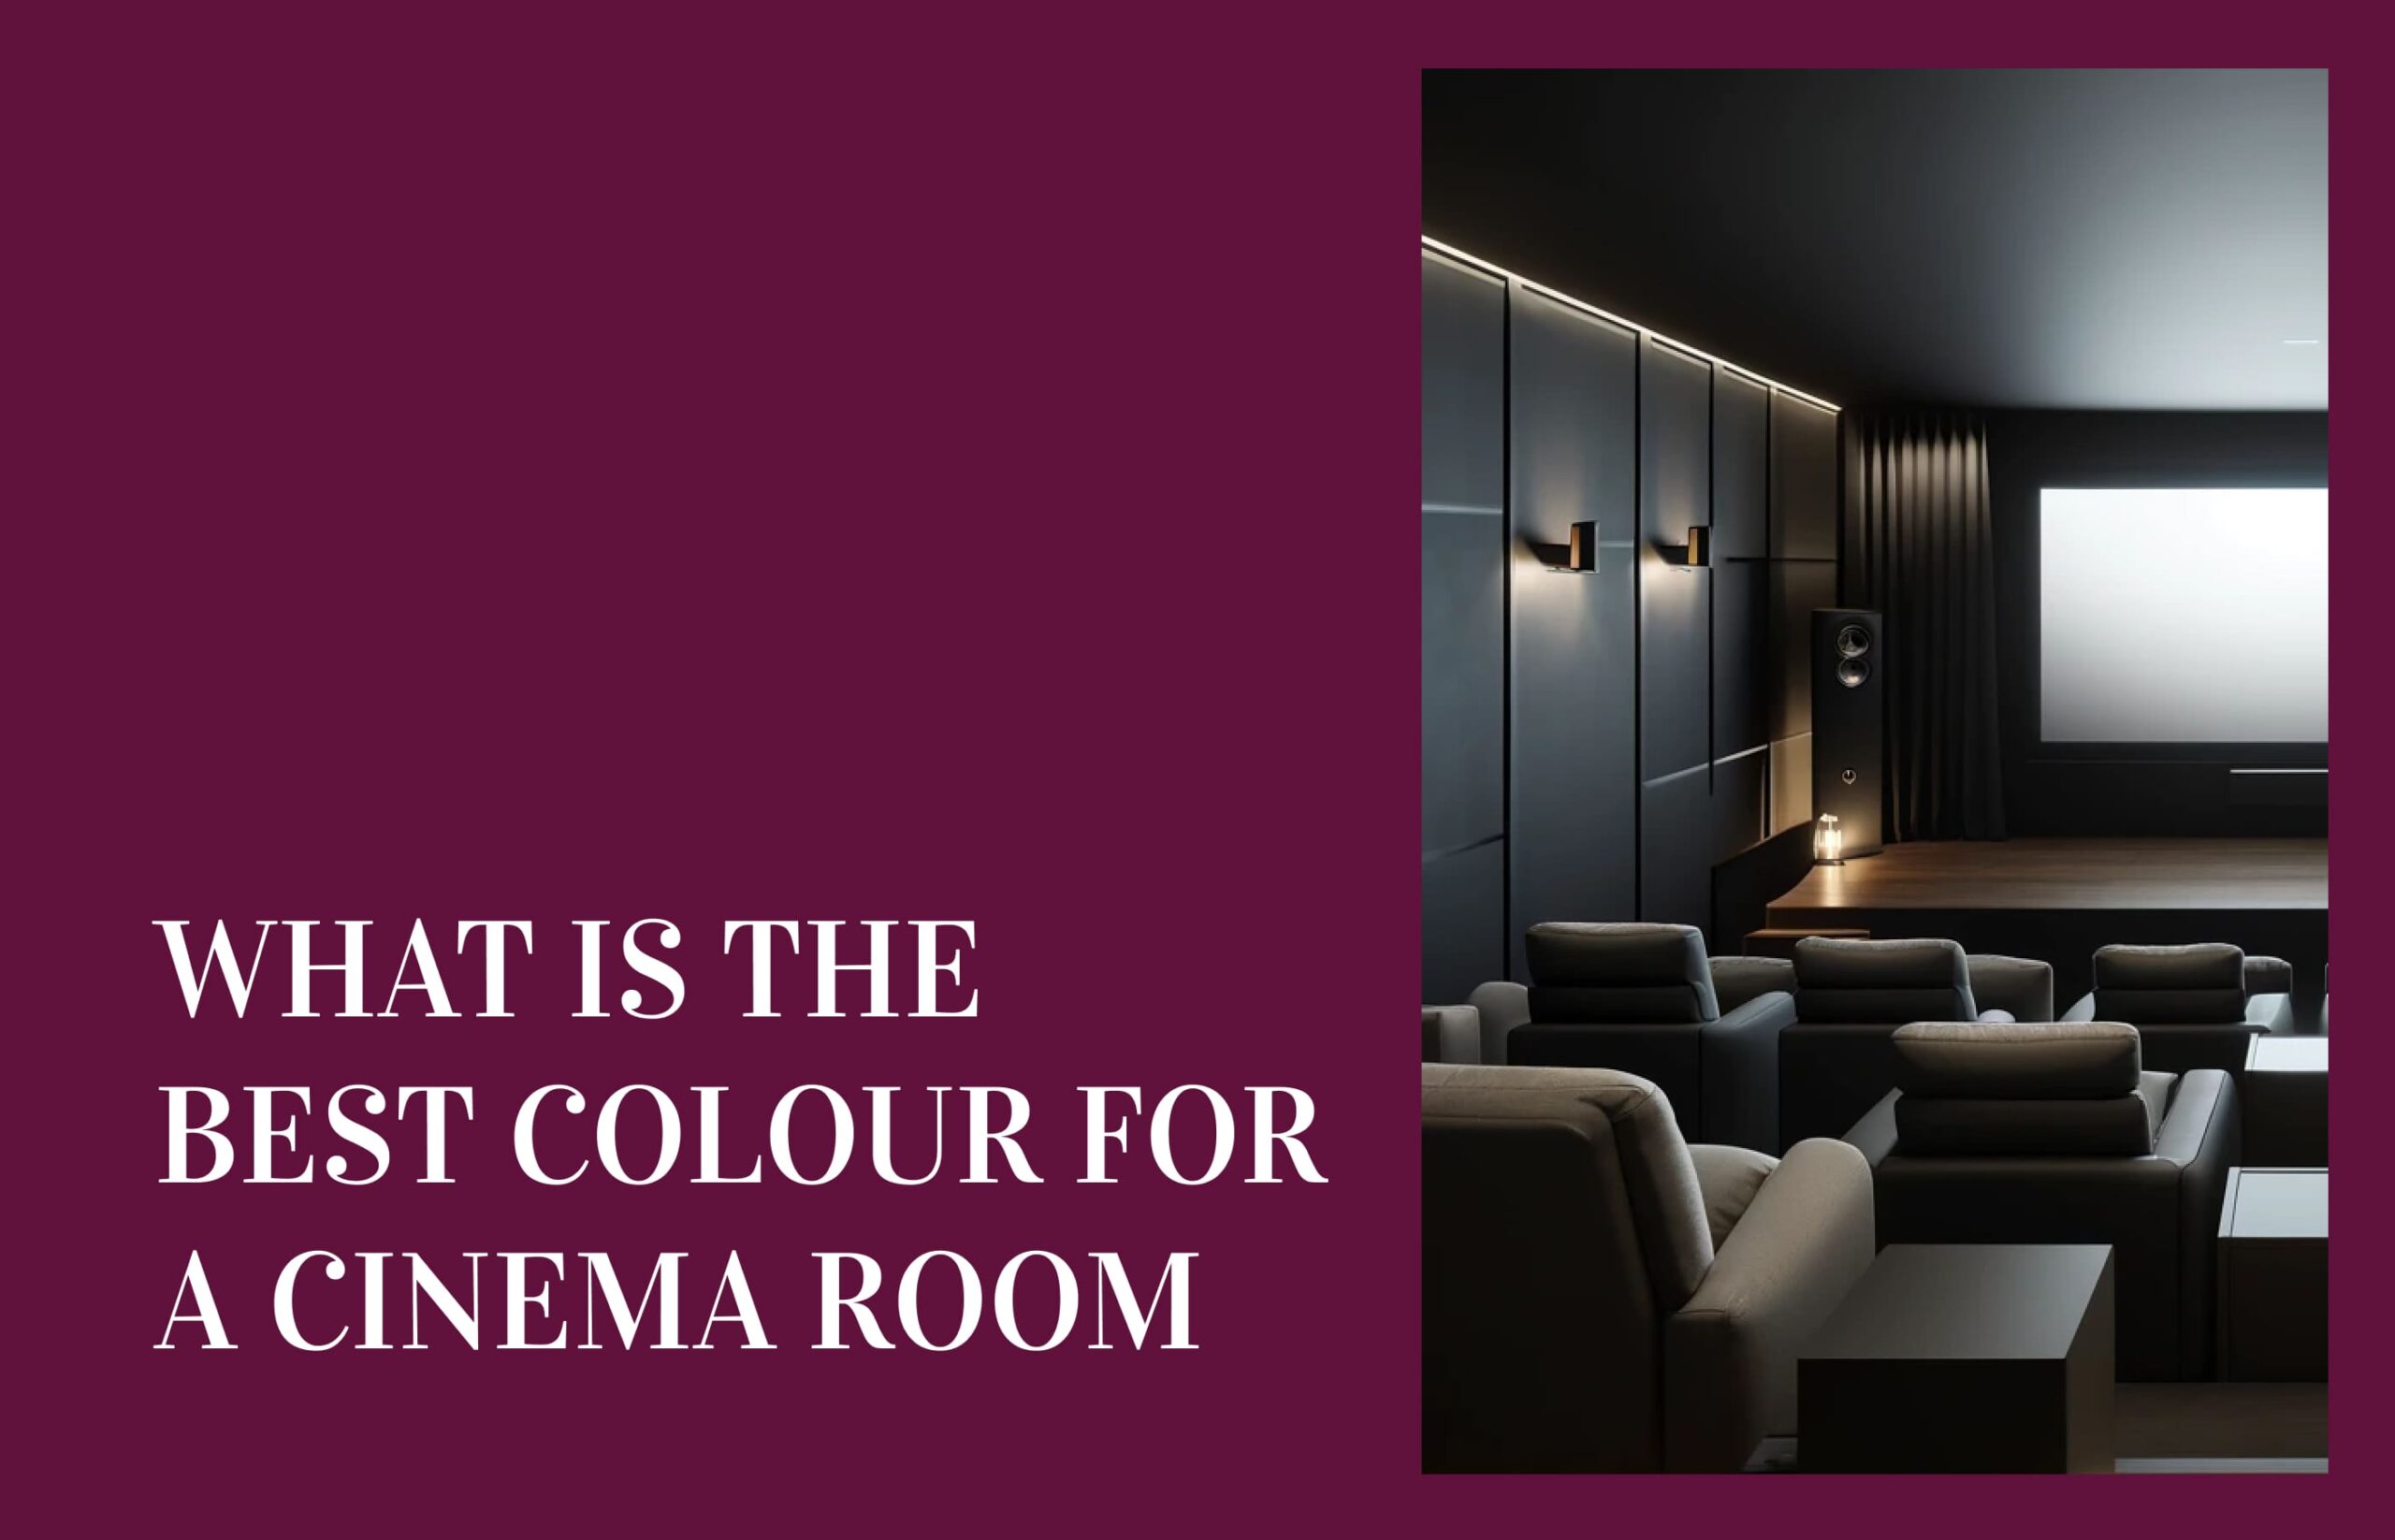 What is the best colour for a cinema room